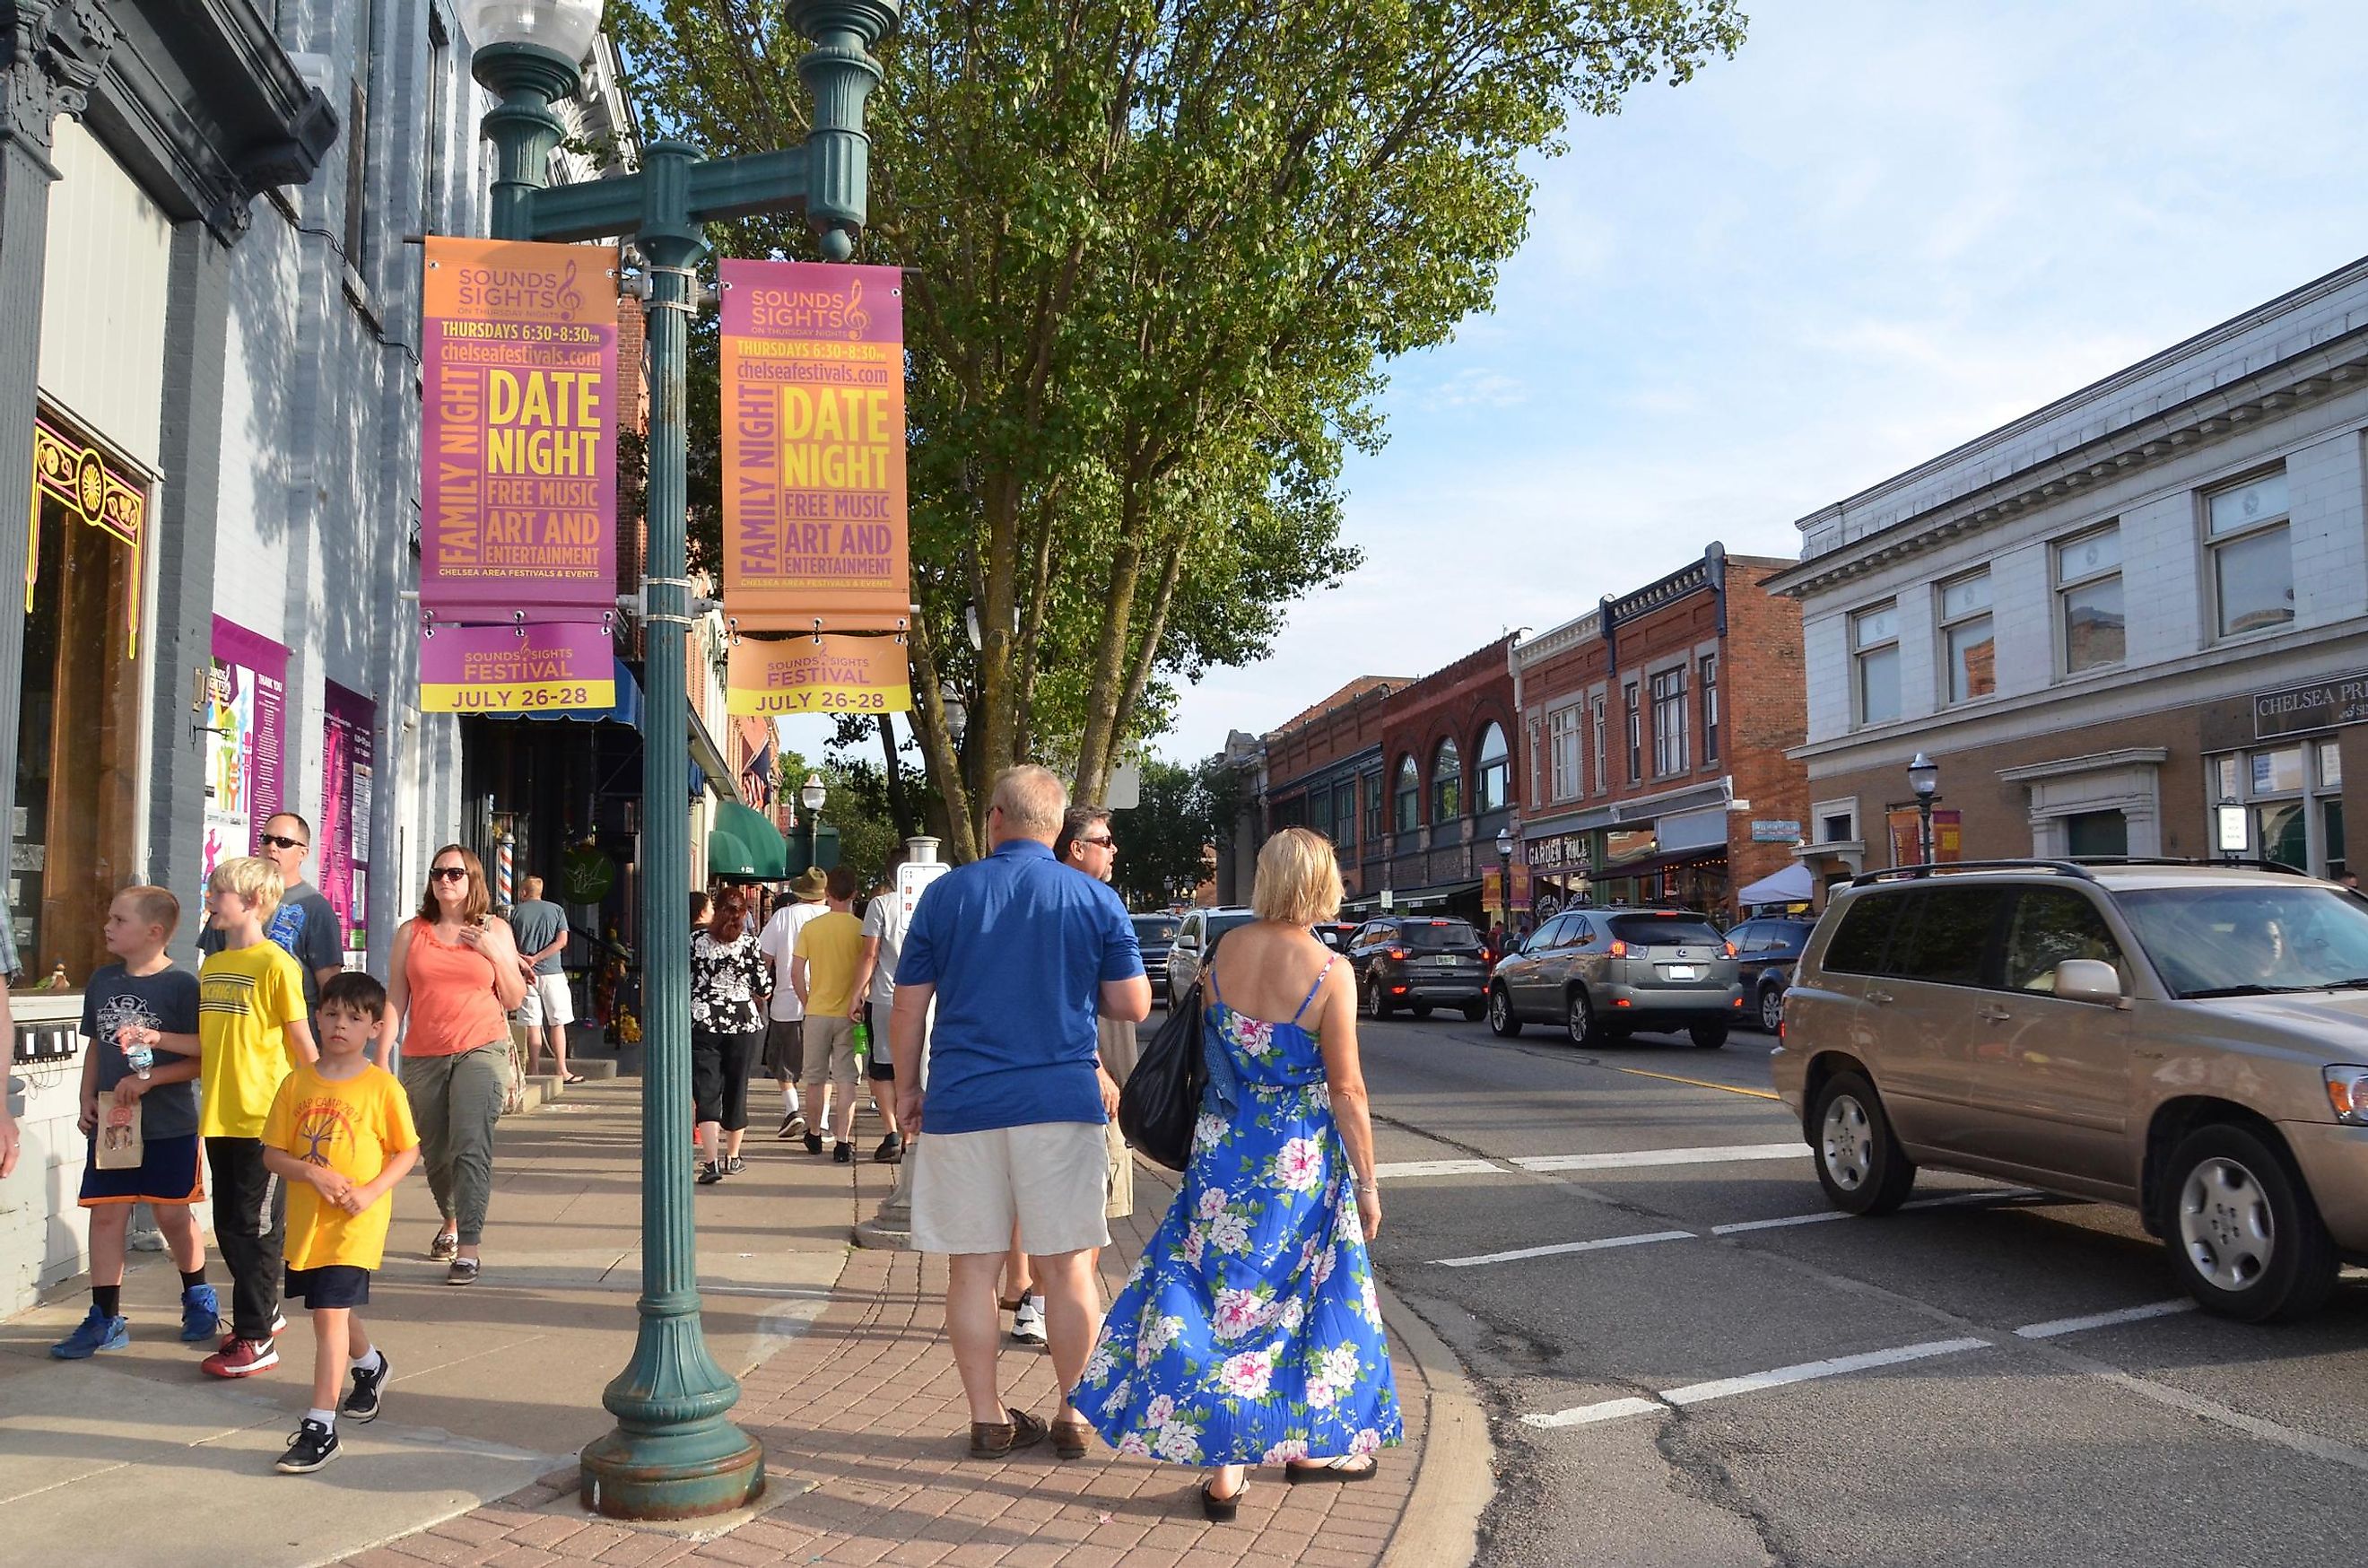 Chelsea, Michigan: Visitors walk along the streets of Chelsea at the Chelsea Sounds and Sights on Thursday Nights festival, via Susan Montgomery / Shutterstock.com